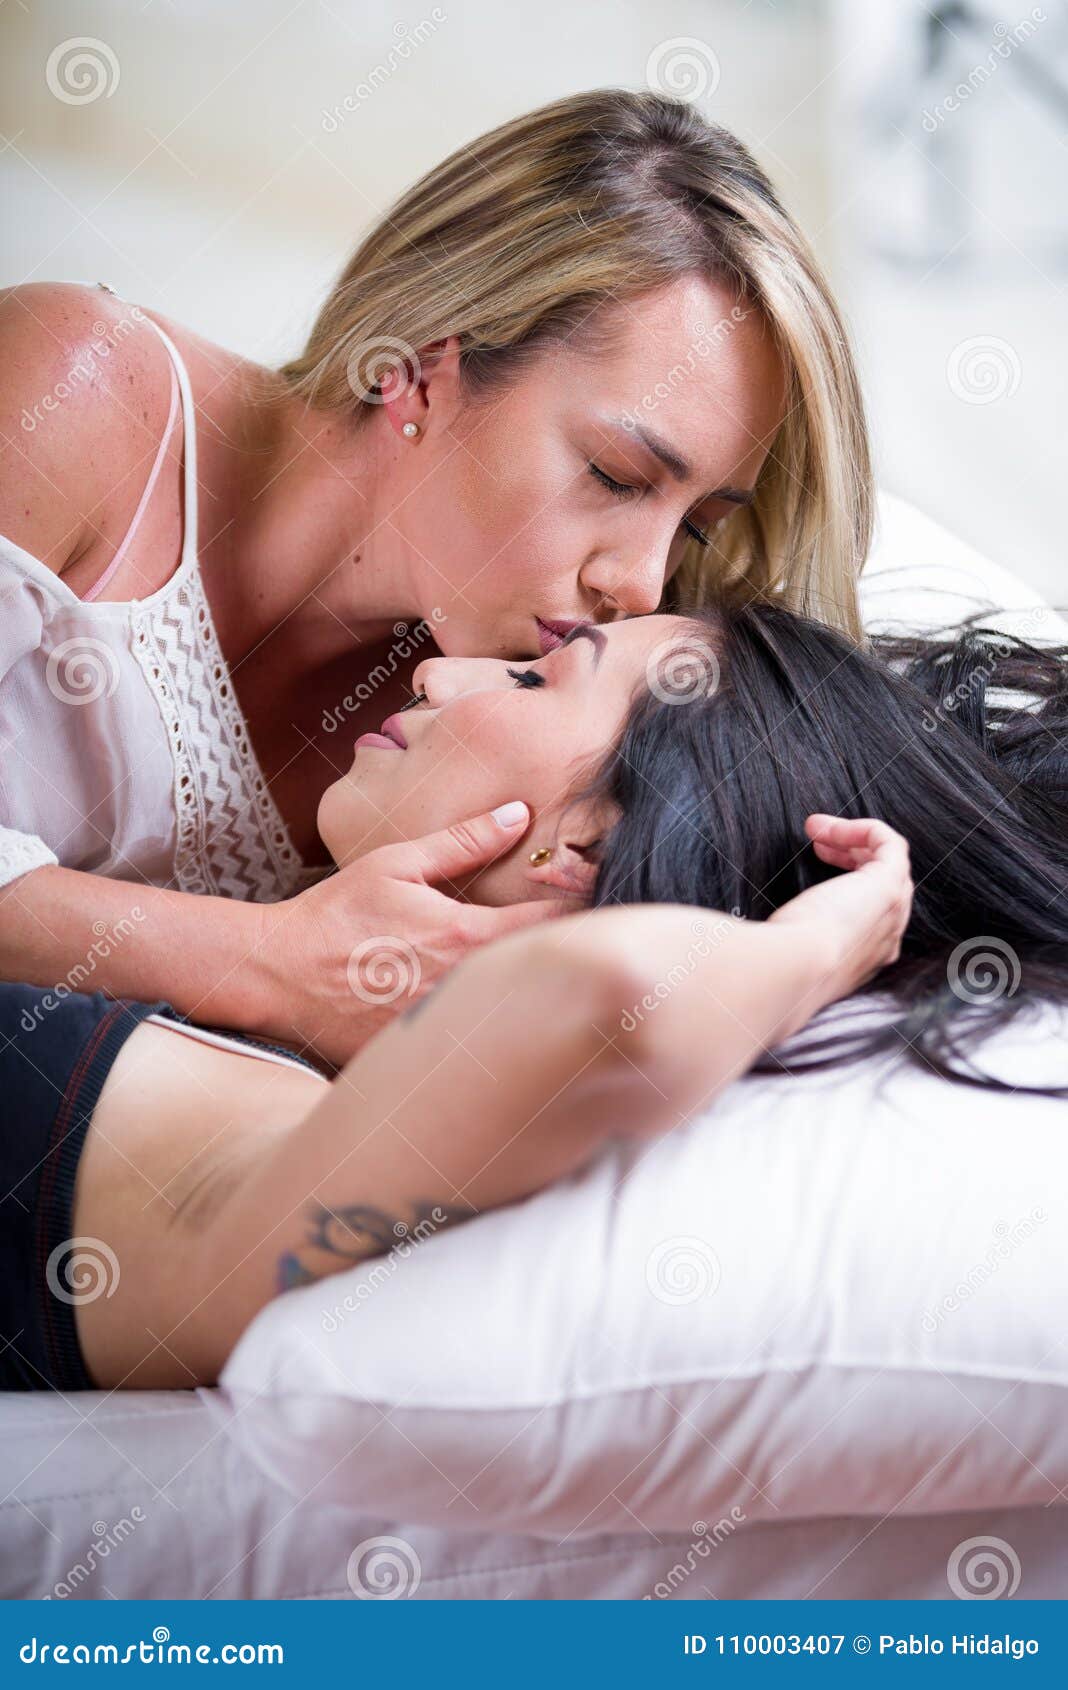 caro kim recommends hot lesbians making out in bed pic